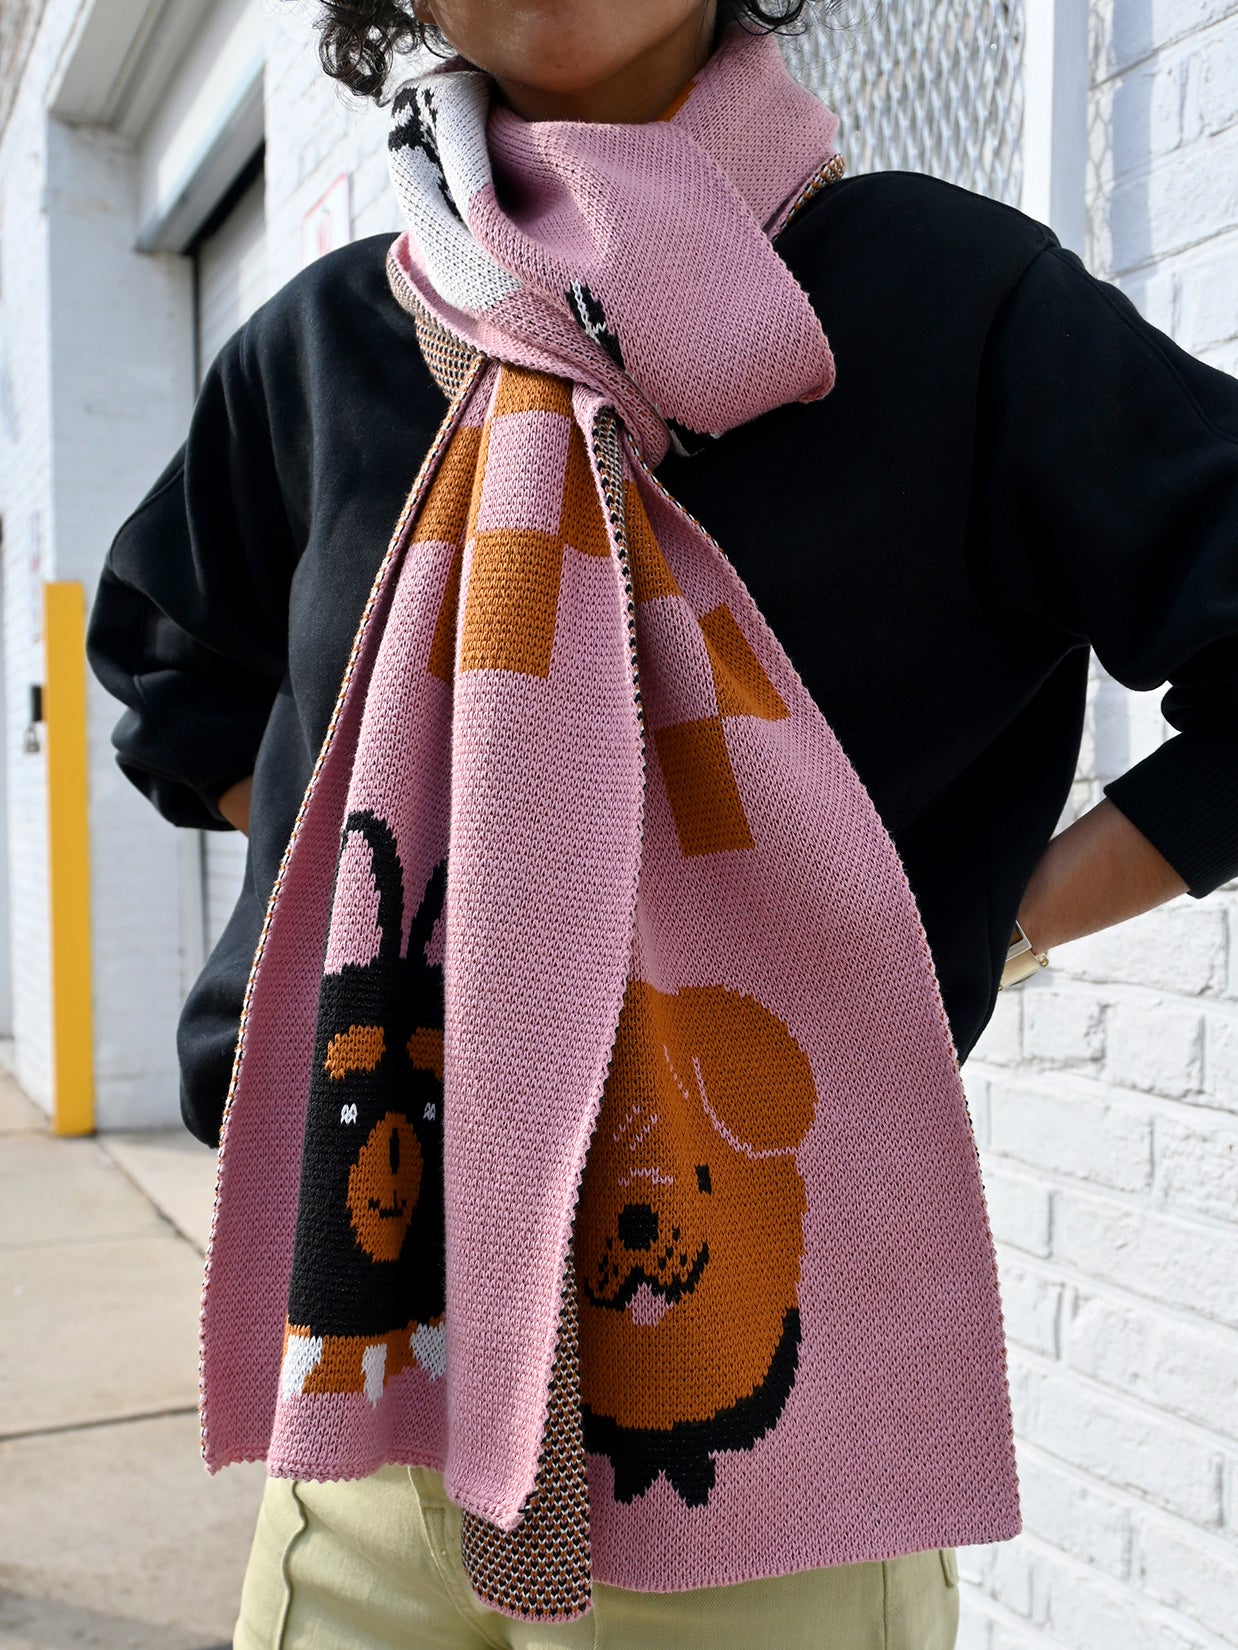 "DOGS" Jumbo scarf - Design by Natali Koromoto. Scarf knit in Long Island, New York. Made with premium soft, durable 100% Egyptian Cotton.